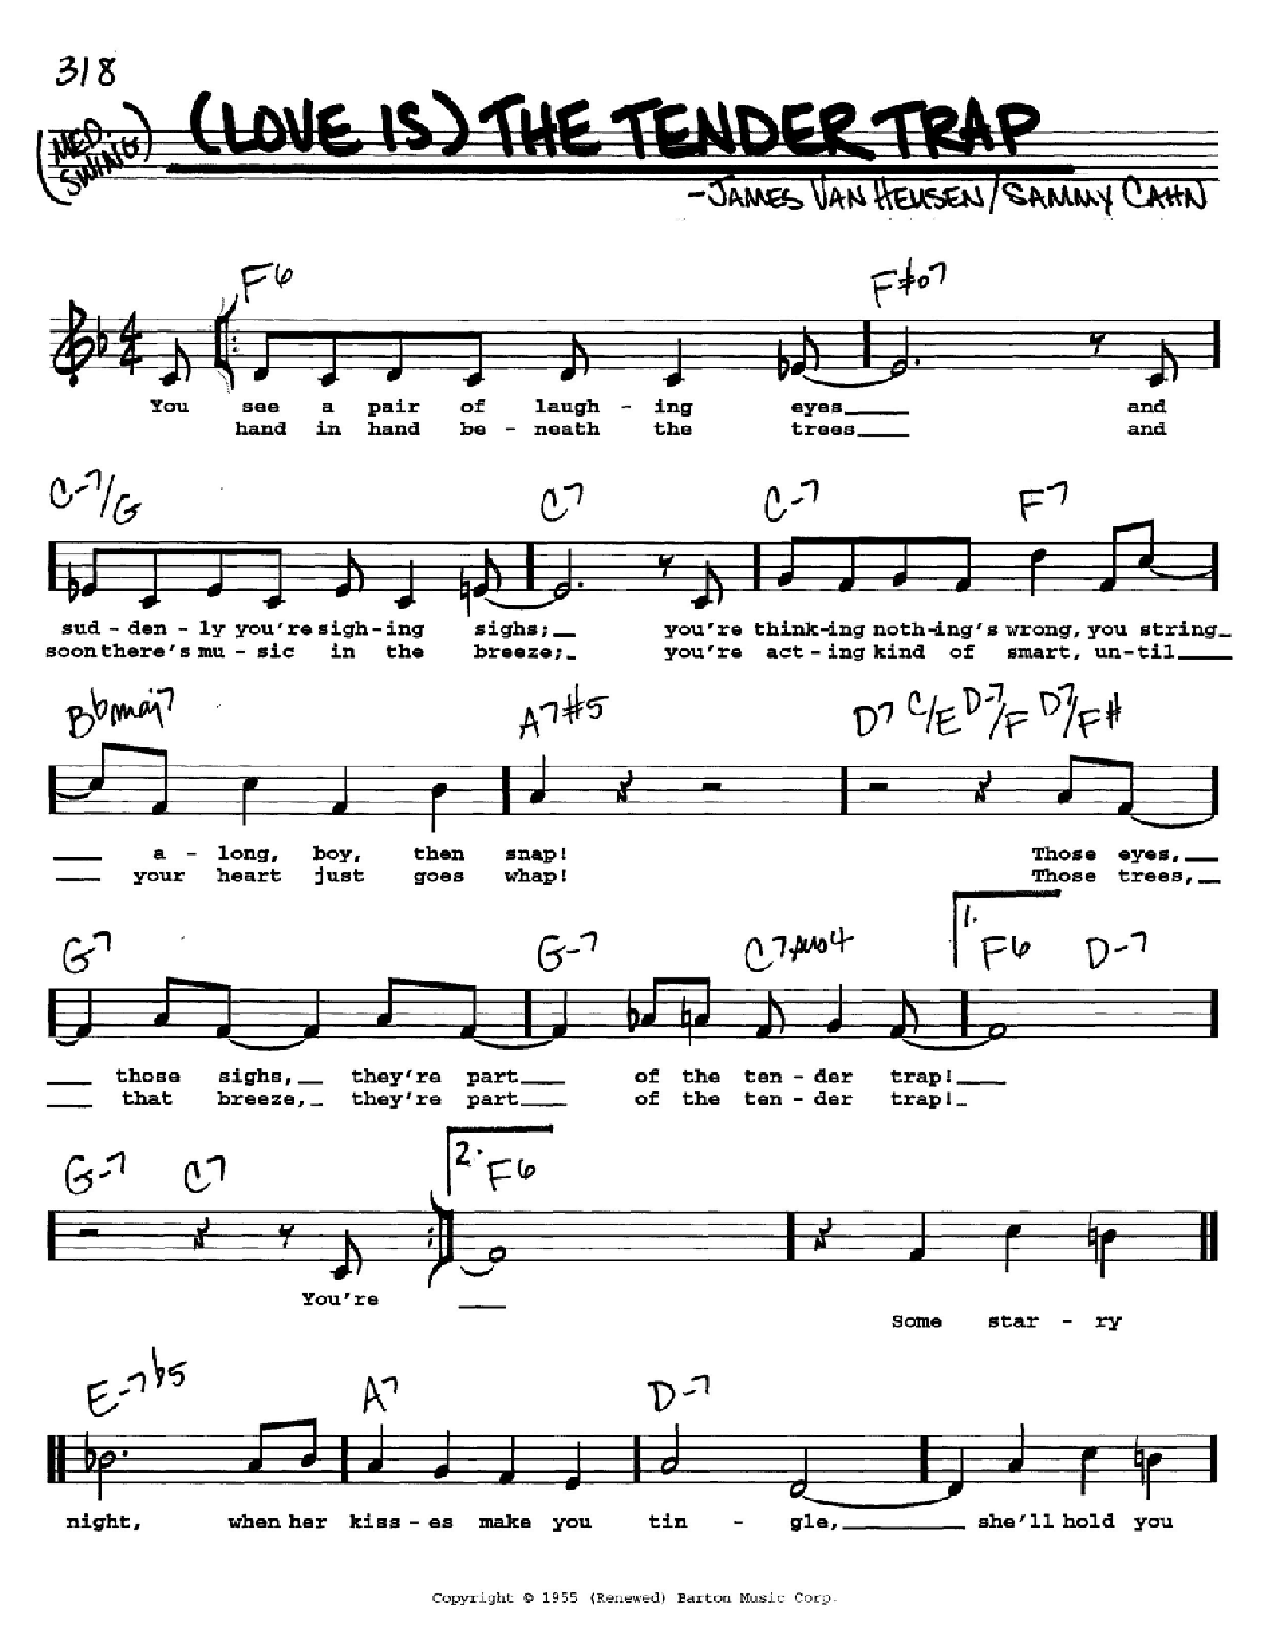 Download Frank Sinatra (Love Is) The Tender Trap Sheet Music